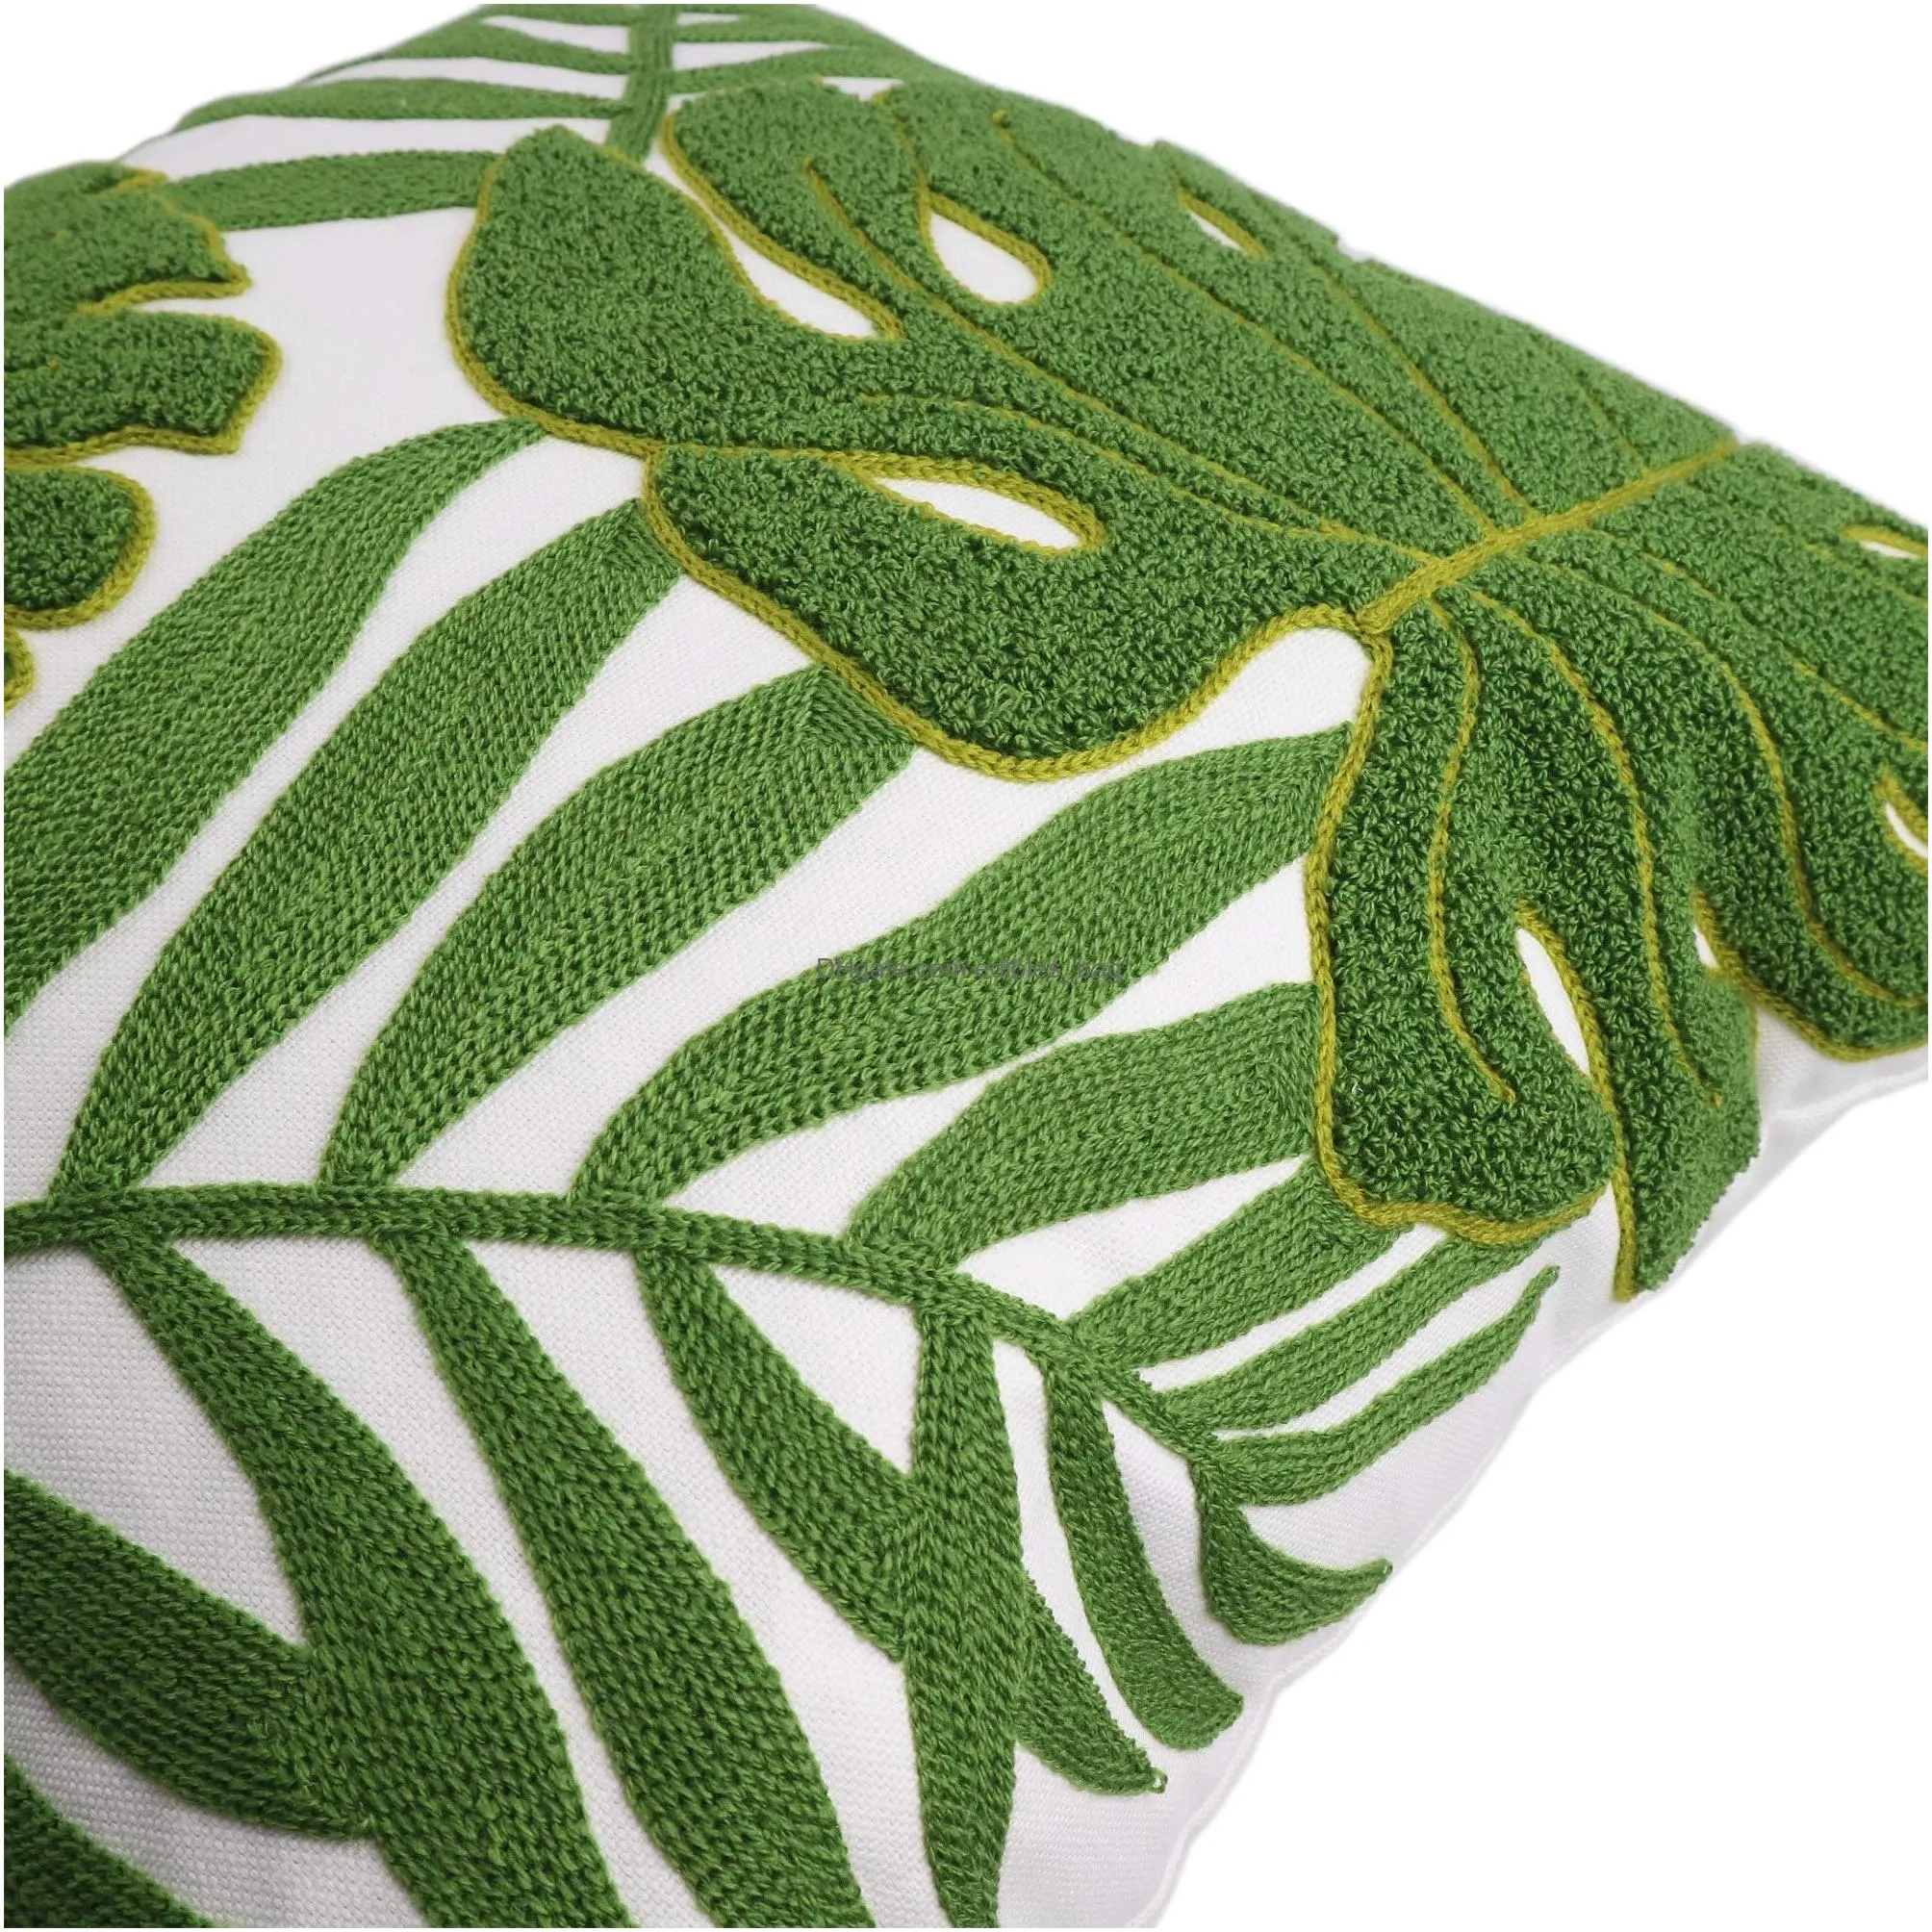 embroidery throw pillow covers 18x18 inch home decor tropical leaf palm pattern pillow cover for couch 100% cotton canvas cushion cover plant monstera leaf